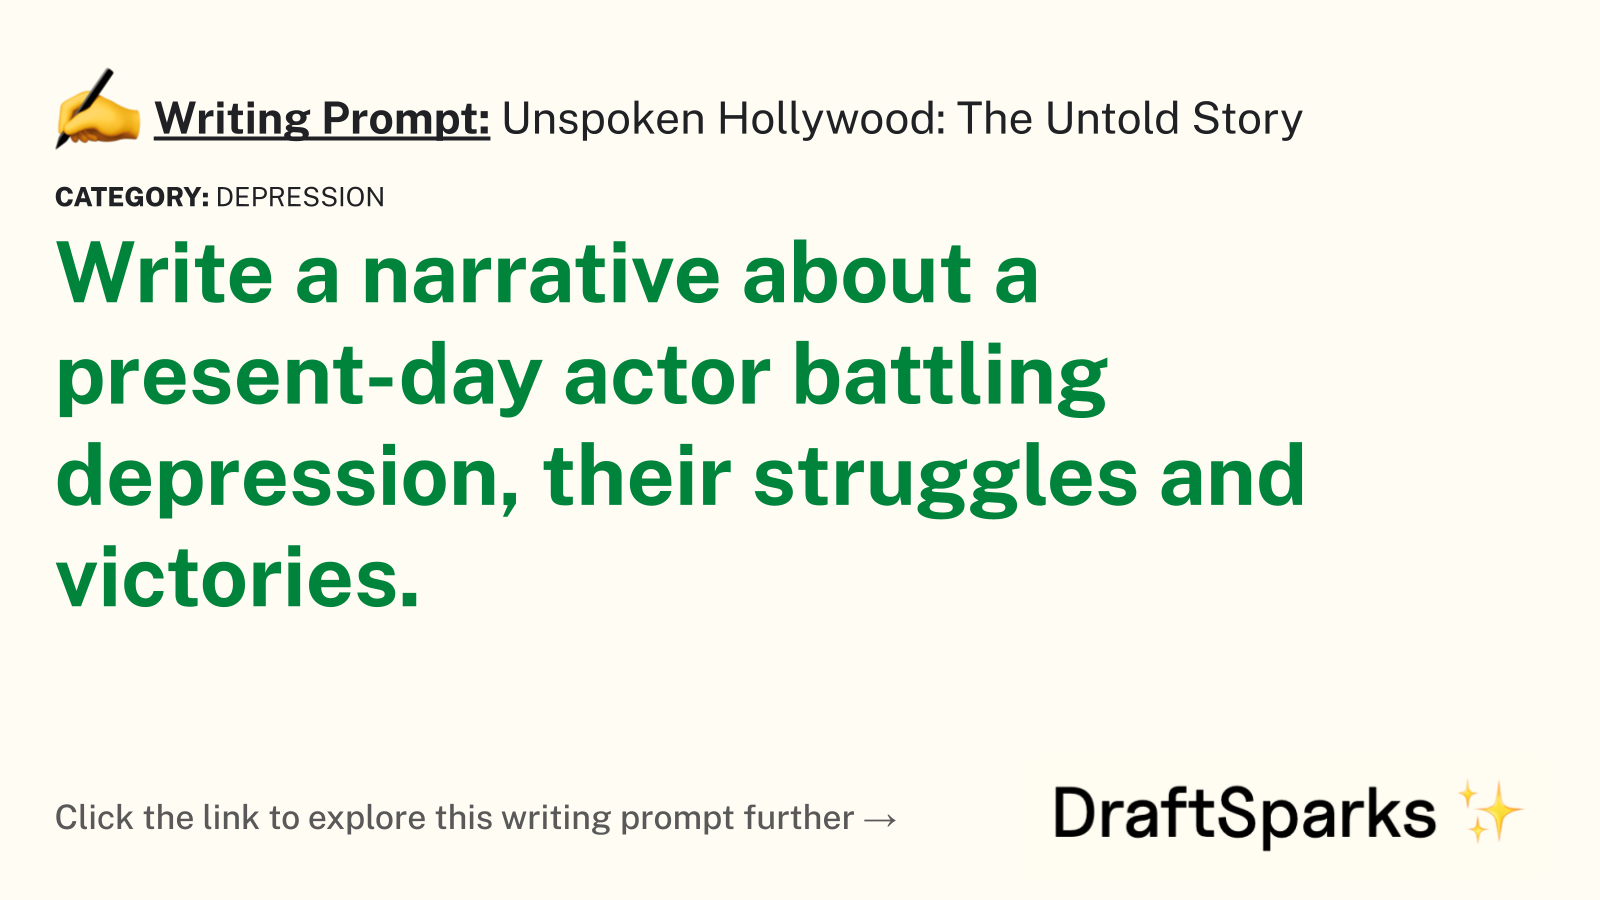 Unspoken Hollywood: The Untold Story